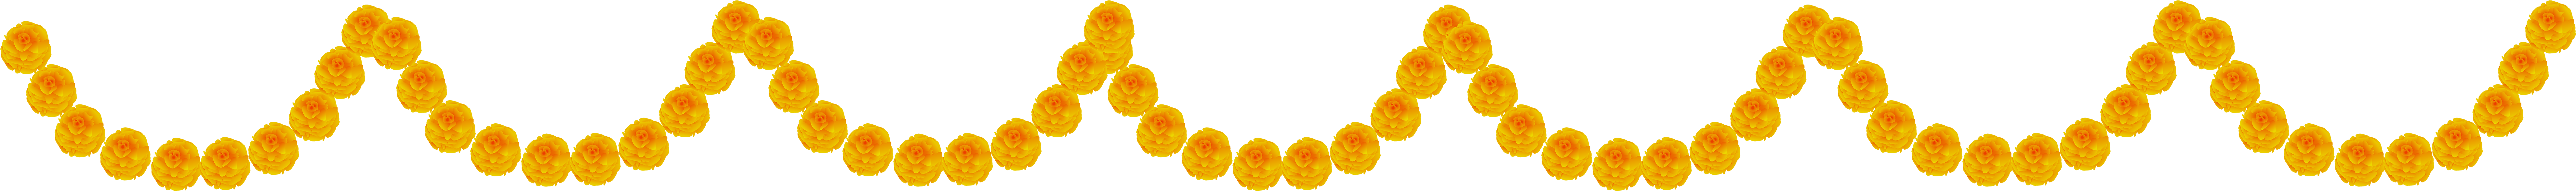 Yellow - Indian Flower Garland Png (8000x723)